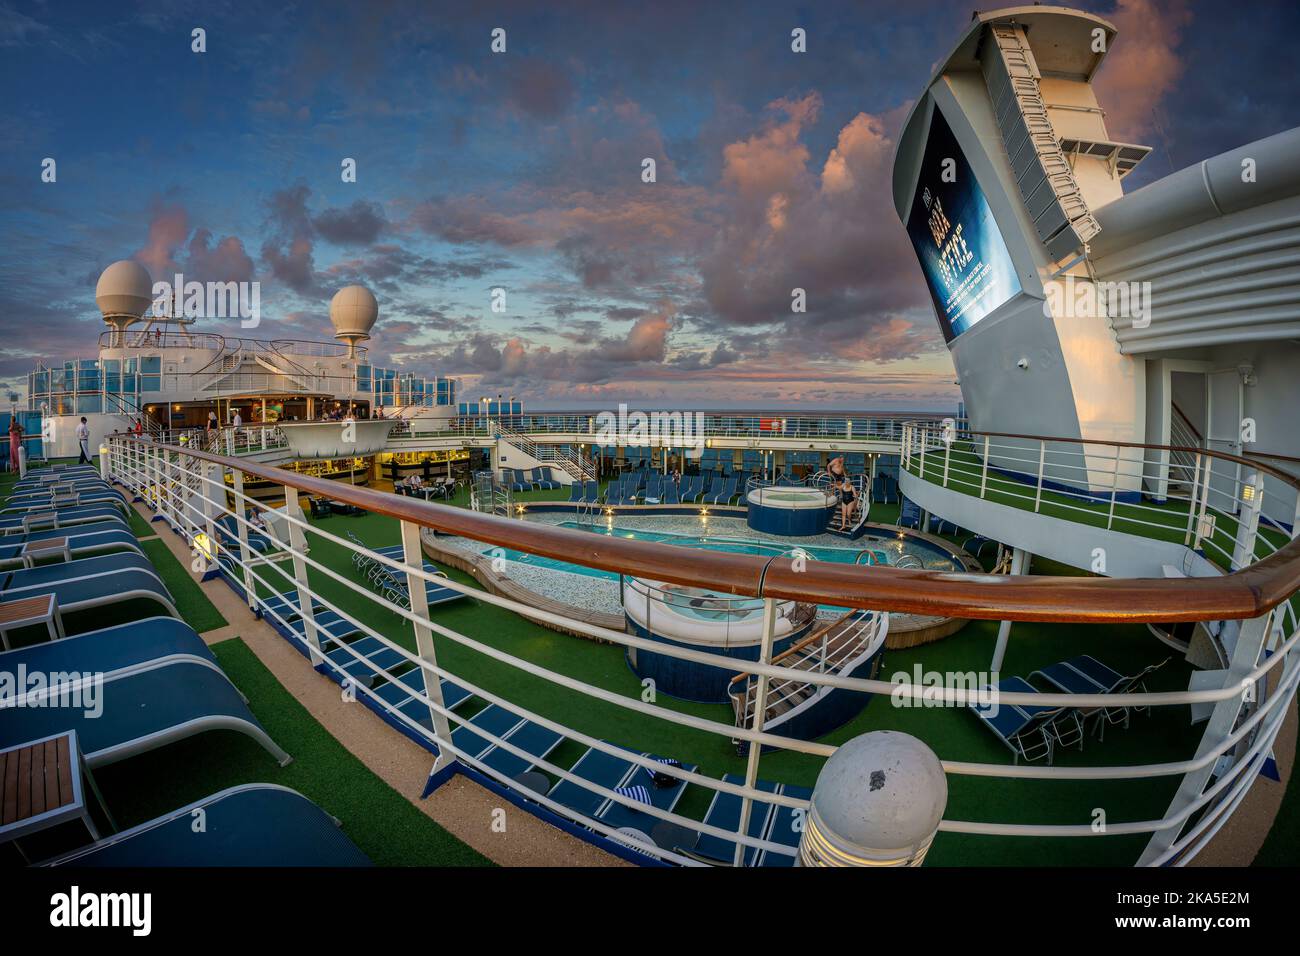 Wide angle view of entertainment deck on cruise liner at sunset with colourful clouds. South Pacific Ocean. Stock Photo